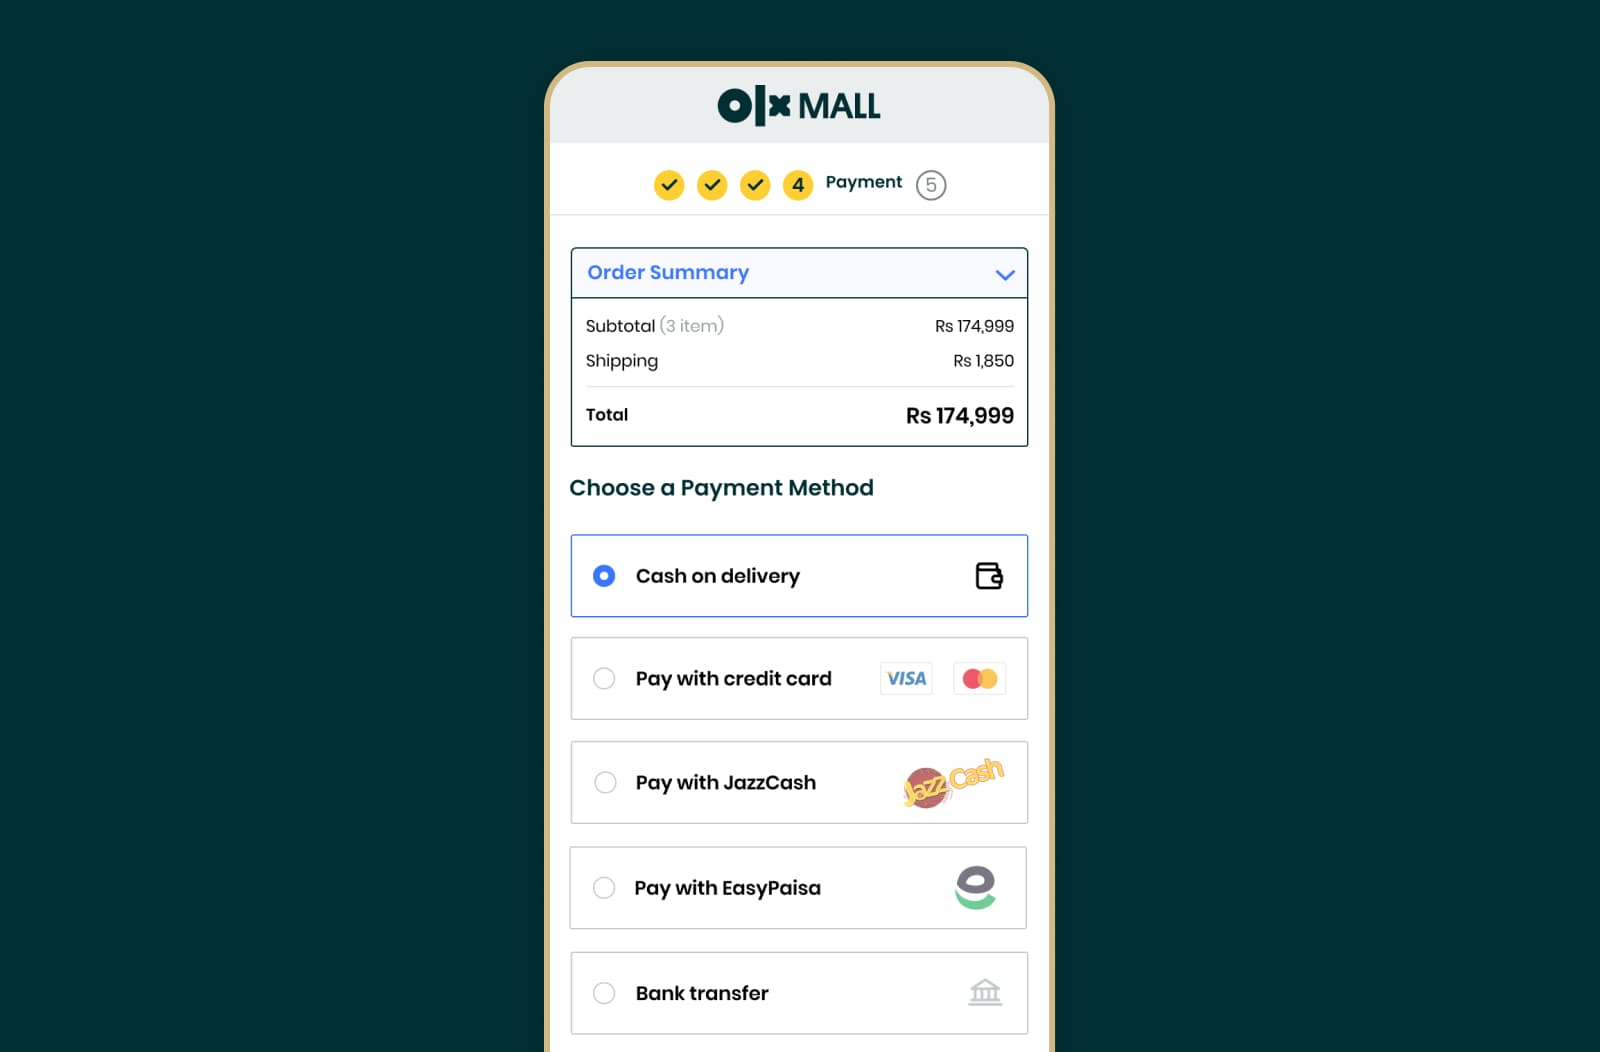 OLX Mall's payment method selector